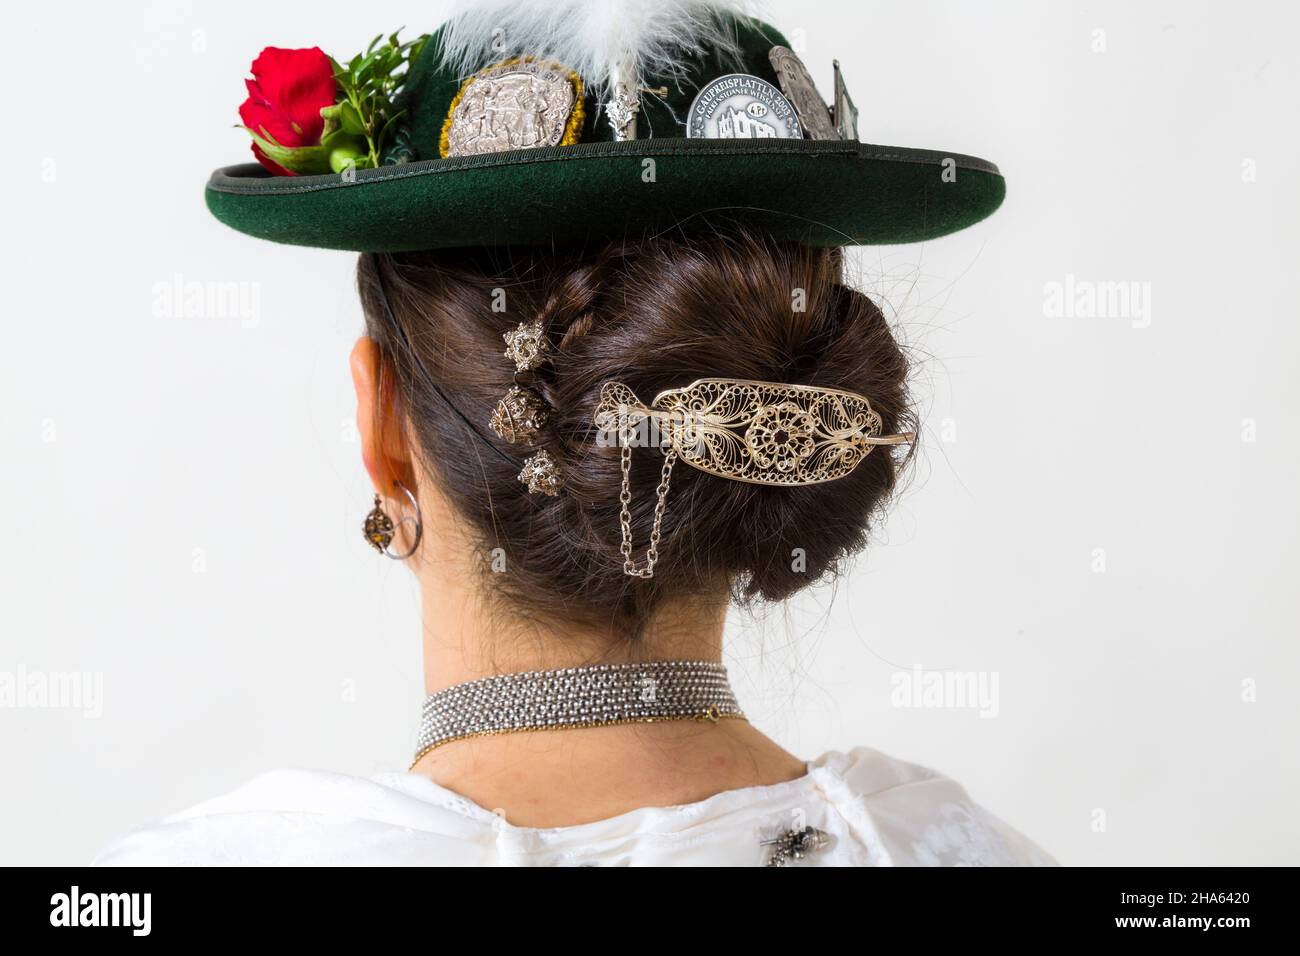 germany,bavaria,woman in traditional costume,the back of a woman's head with silver hair accessories Stock Photo